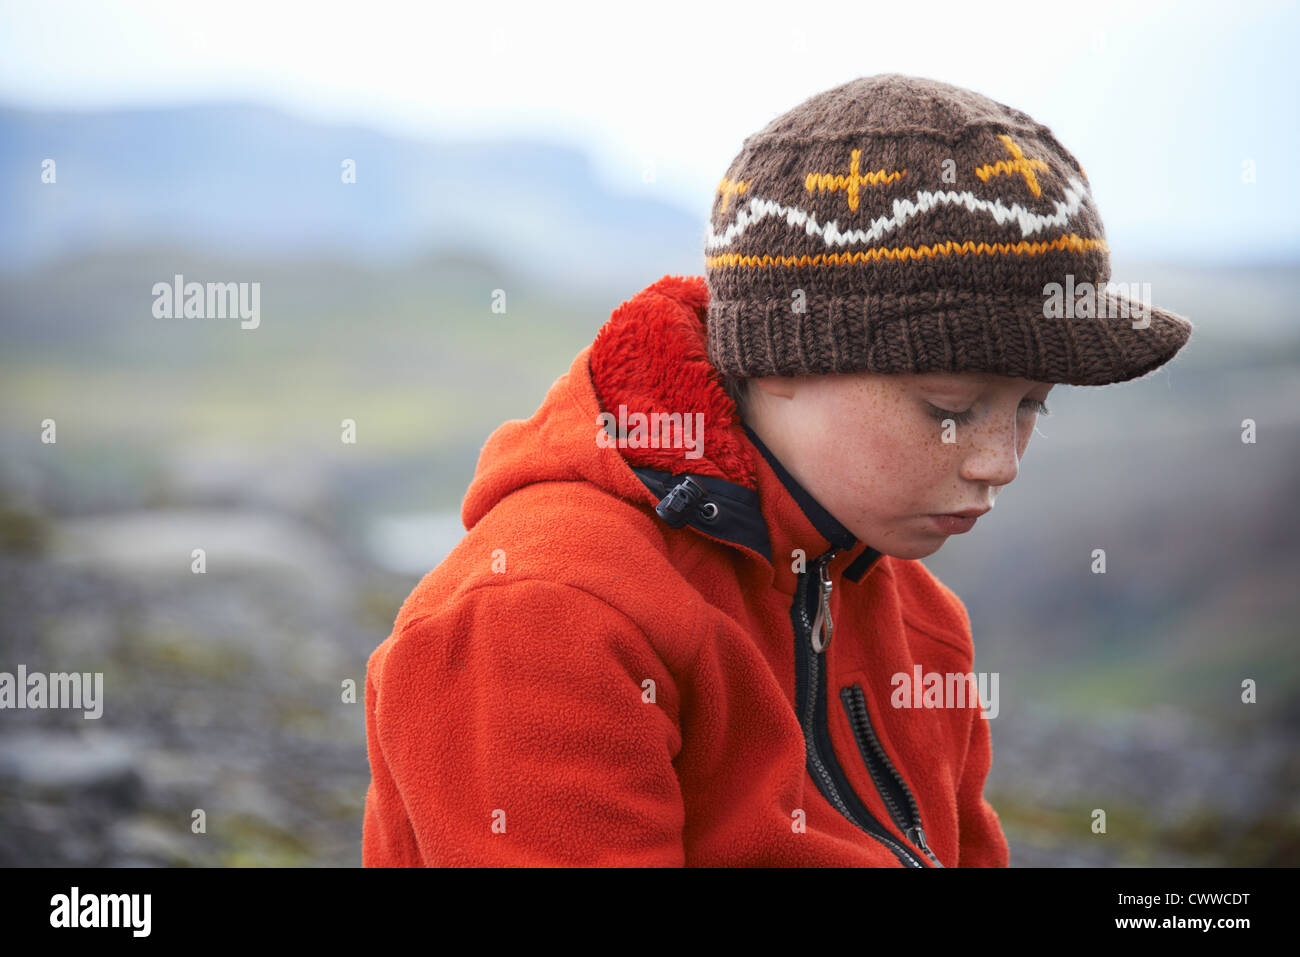 Girl wearing knitted cap outdoors Stock Photo